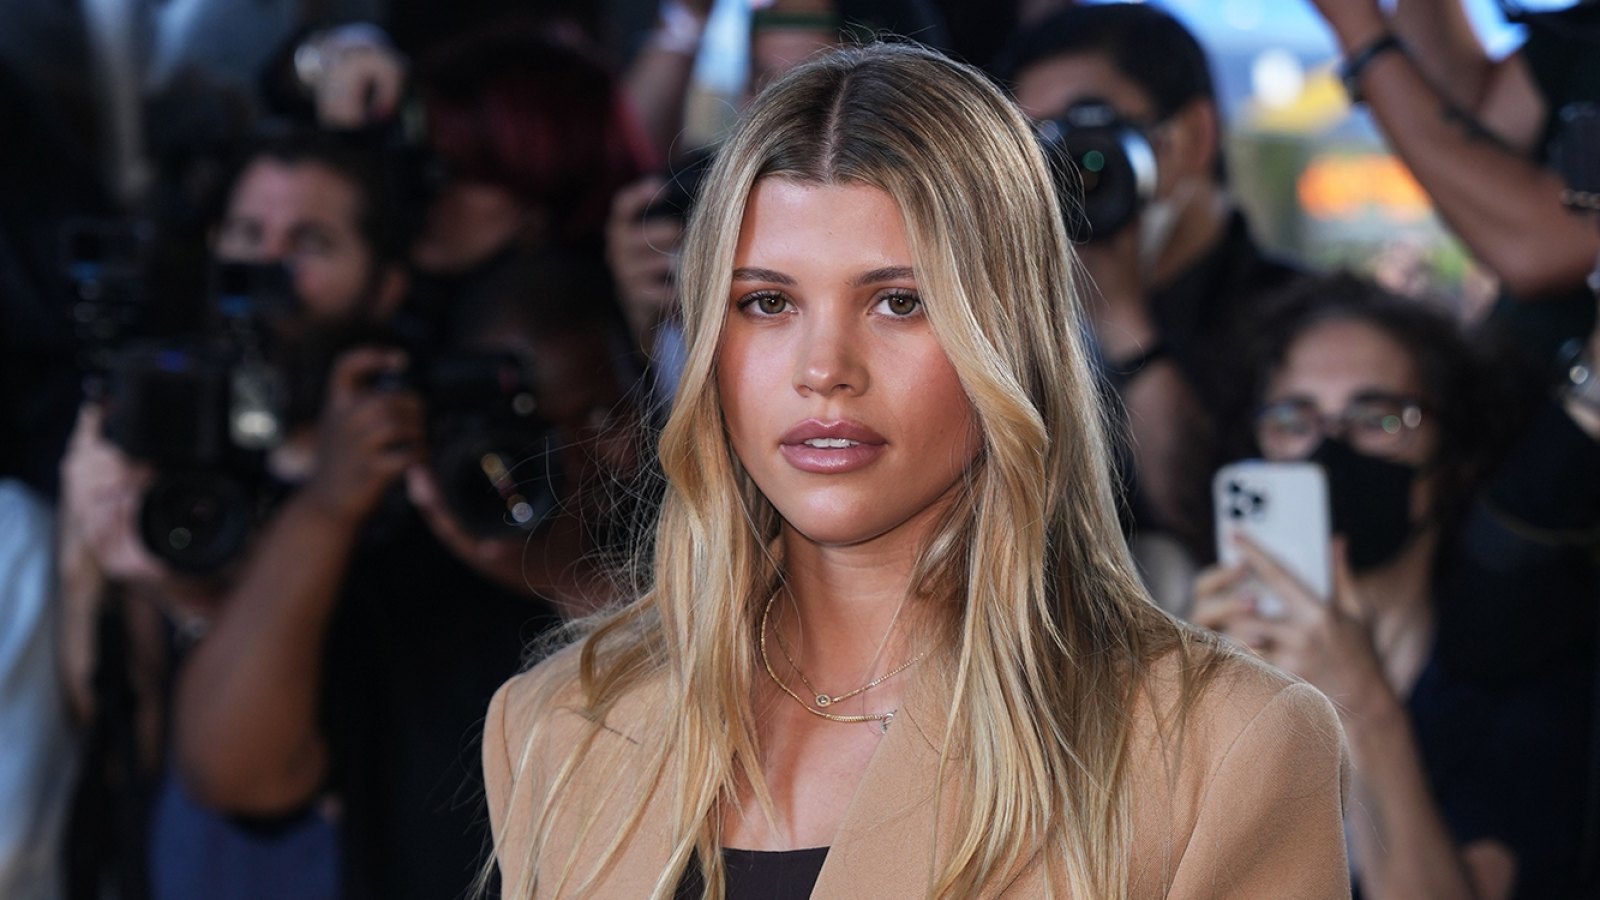 Even Sofia Richie's Gym Outfit Is Giving Stealth Wealth